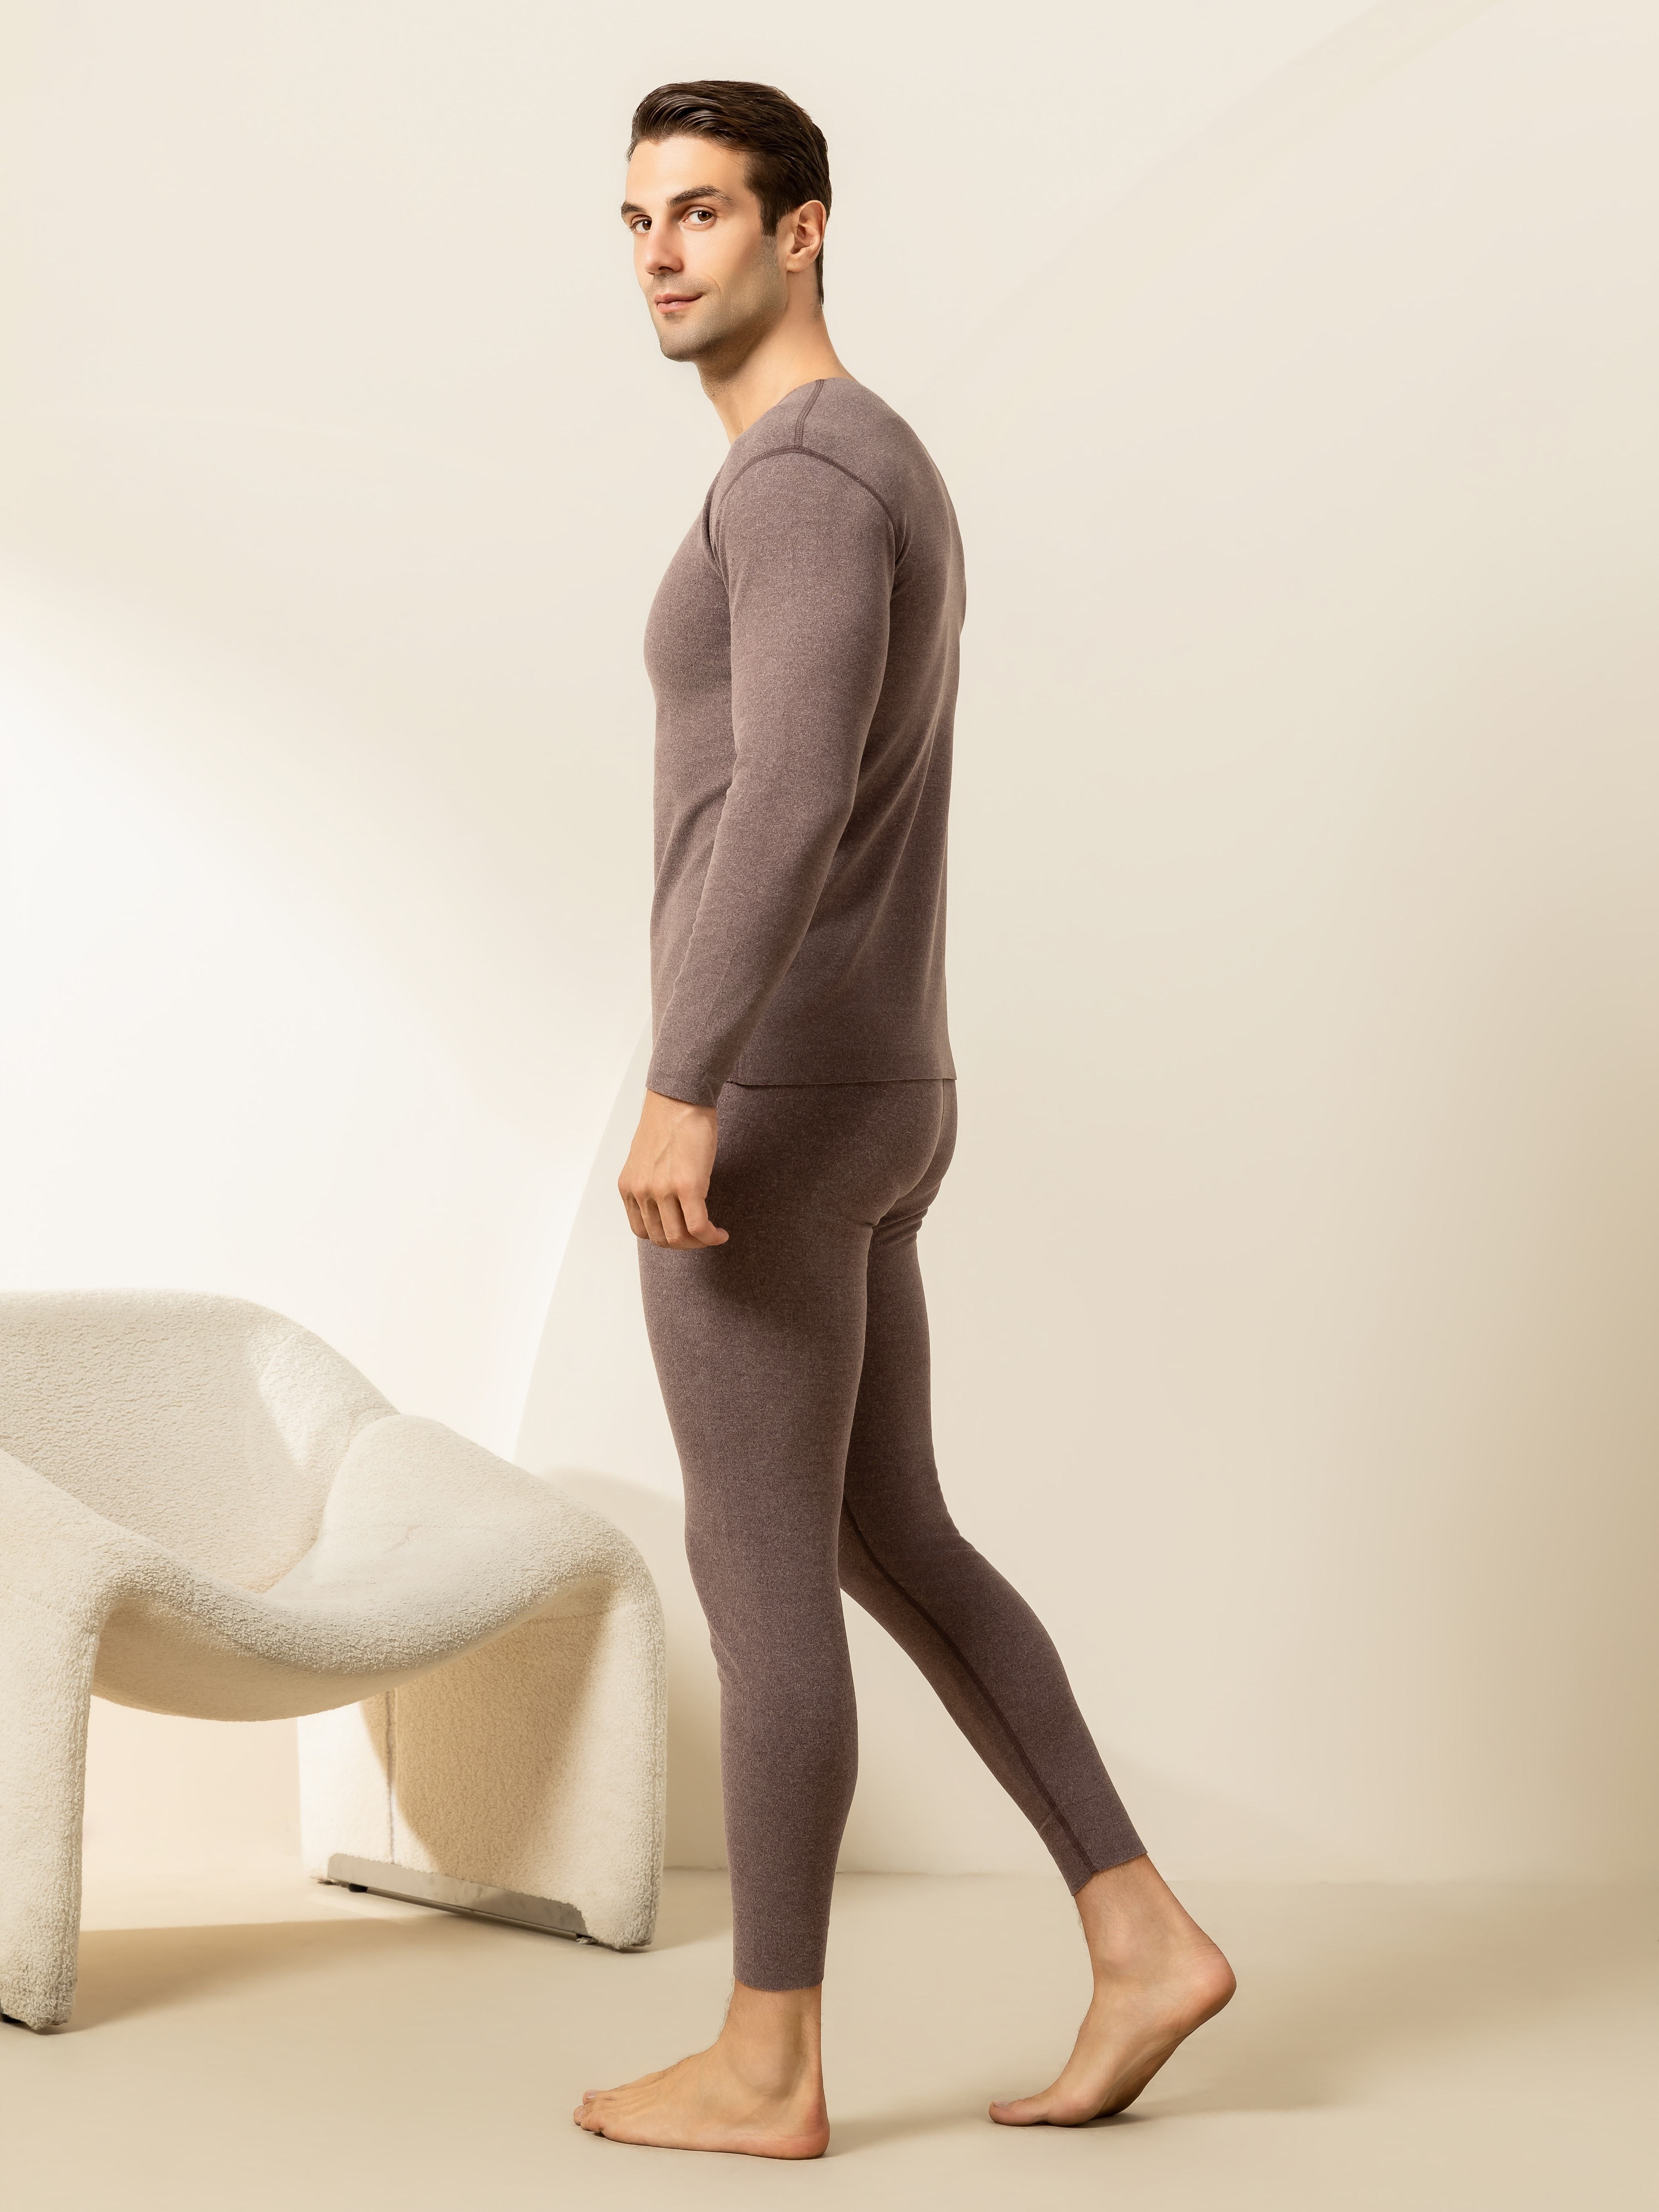 Winter Thermal Underwear Set For Men Thickened Bottom Shirt Long Johns 2pcs  Thick Fleece Pajamas Suit Inner Wear Basic Clothing